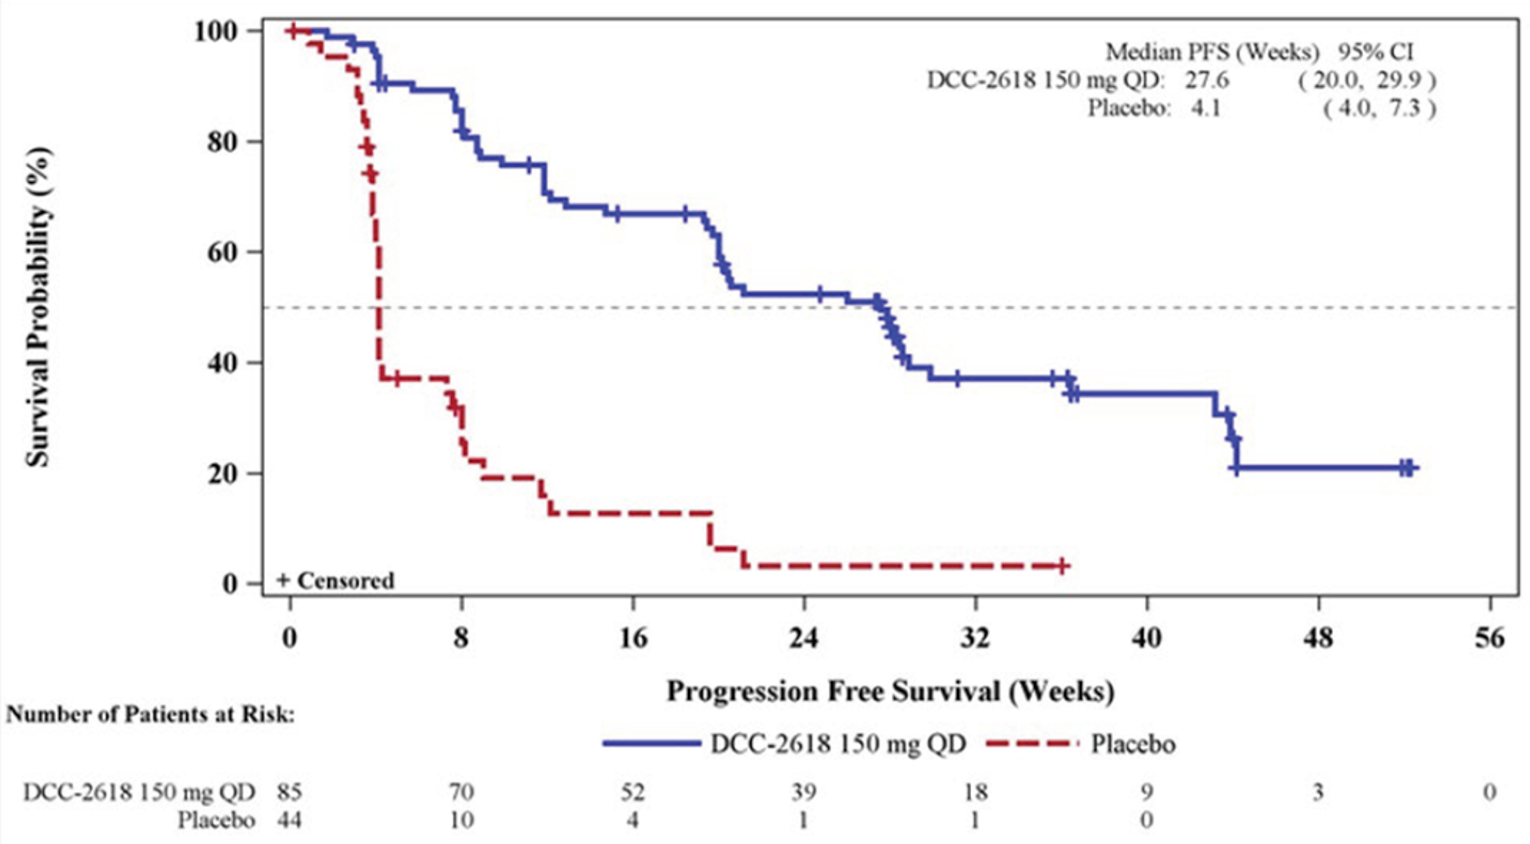 In this Kaplan-Meier analysis of PFS among the ITT population during the DB period of the INVICTUS trial as of the May 31, 2019, database lock, patients randomized to receive placebo had PFS probabilities of approximately 75% at 3 weeks, approximately 50% at 4 weeks, and approximately 25% at 8 weeks. By contrast, patients randomized to receive ripretinib 150 mg once daily during the DB period had PFS probabilities of approximately 75% at 12 weeks, approximately 50% at 28 weeks, and approximately 25% at 44 weeks. Median PFS was 27.6 (95% CI, 20.0 to 29.9) weeks among patients randomized to receive ripretinib 150 mg once daily during the DB period and 4.1 (95% CI, 4.0 to 7.3) weeks among patients randomized to receive placebo during the DB period. The number of at-risk patients randomized to receive ripretinib 150 mg once daily during the DB period at 0, 8, 16, 24, 32, 40, 48, and 56 weeks was 85, 70, 52, 39, 18, 9, 3, and 0, respectively. The number of at-risk patients randomized to receive placebo during the DB period at 0, 8, 16, 24, 32, and 40 weeks was 44, 10, 4, 1, 1, and 0, respectively.